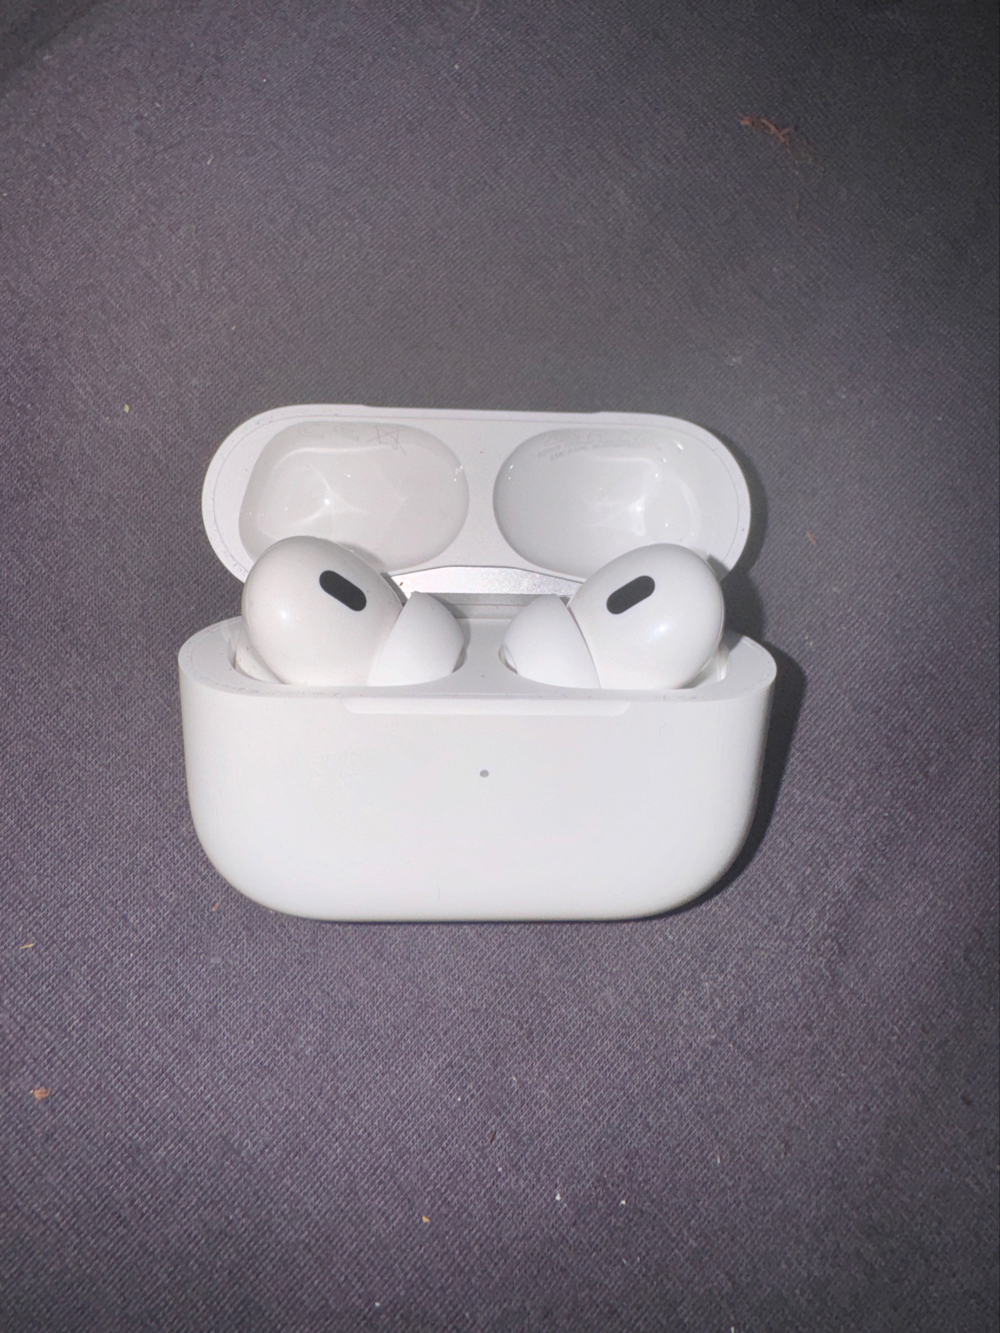 Apple Airpods 2 Generation 